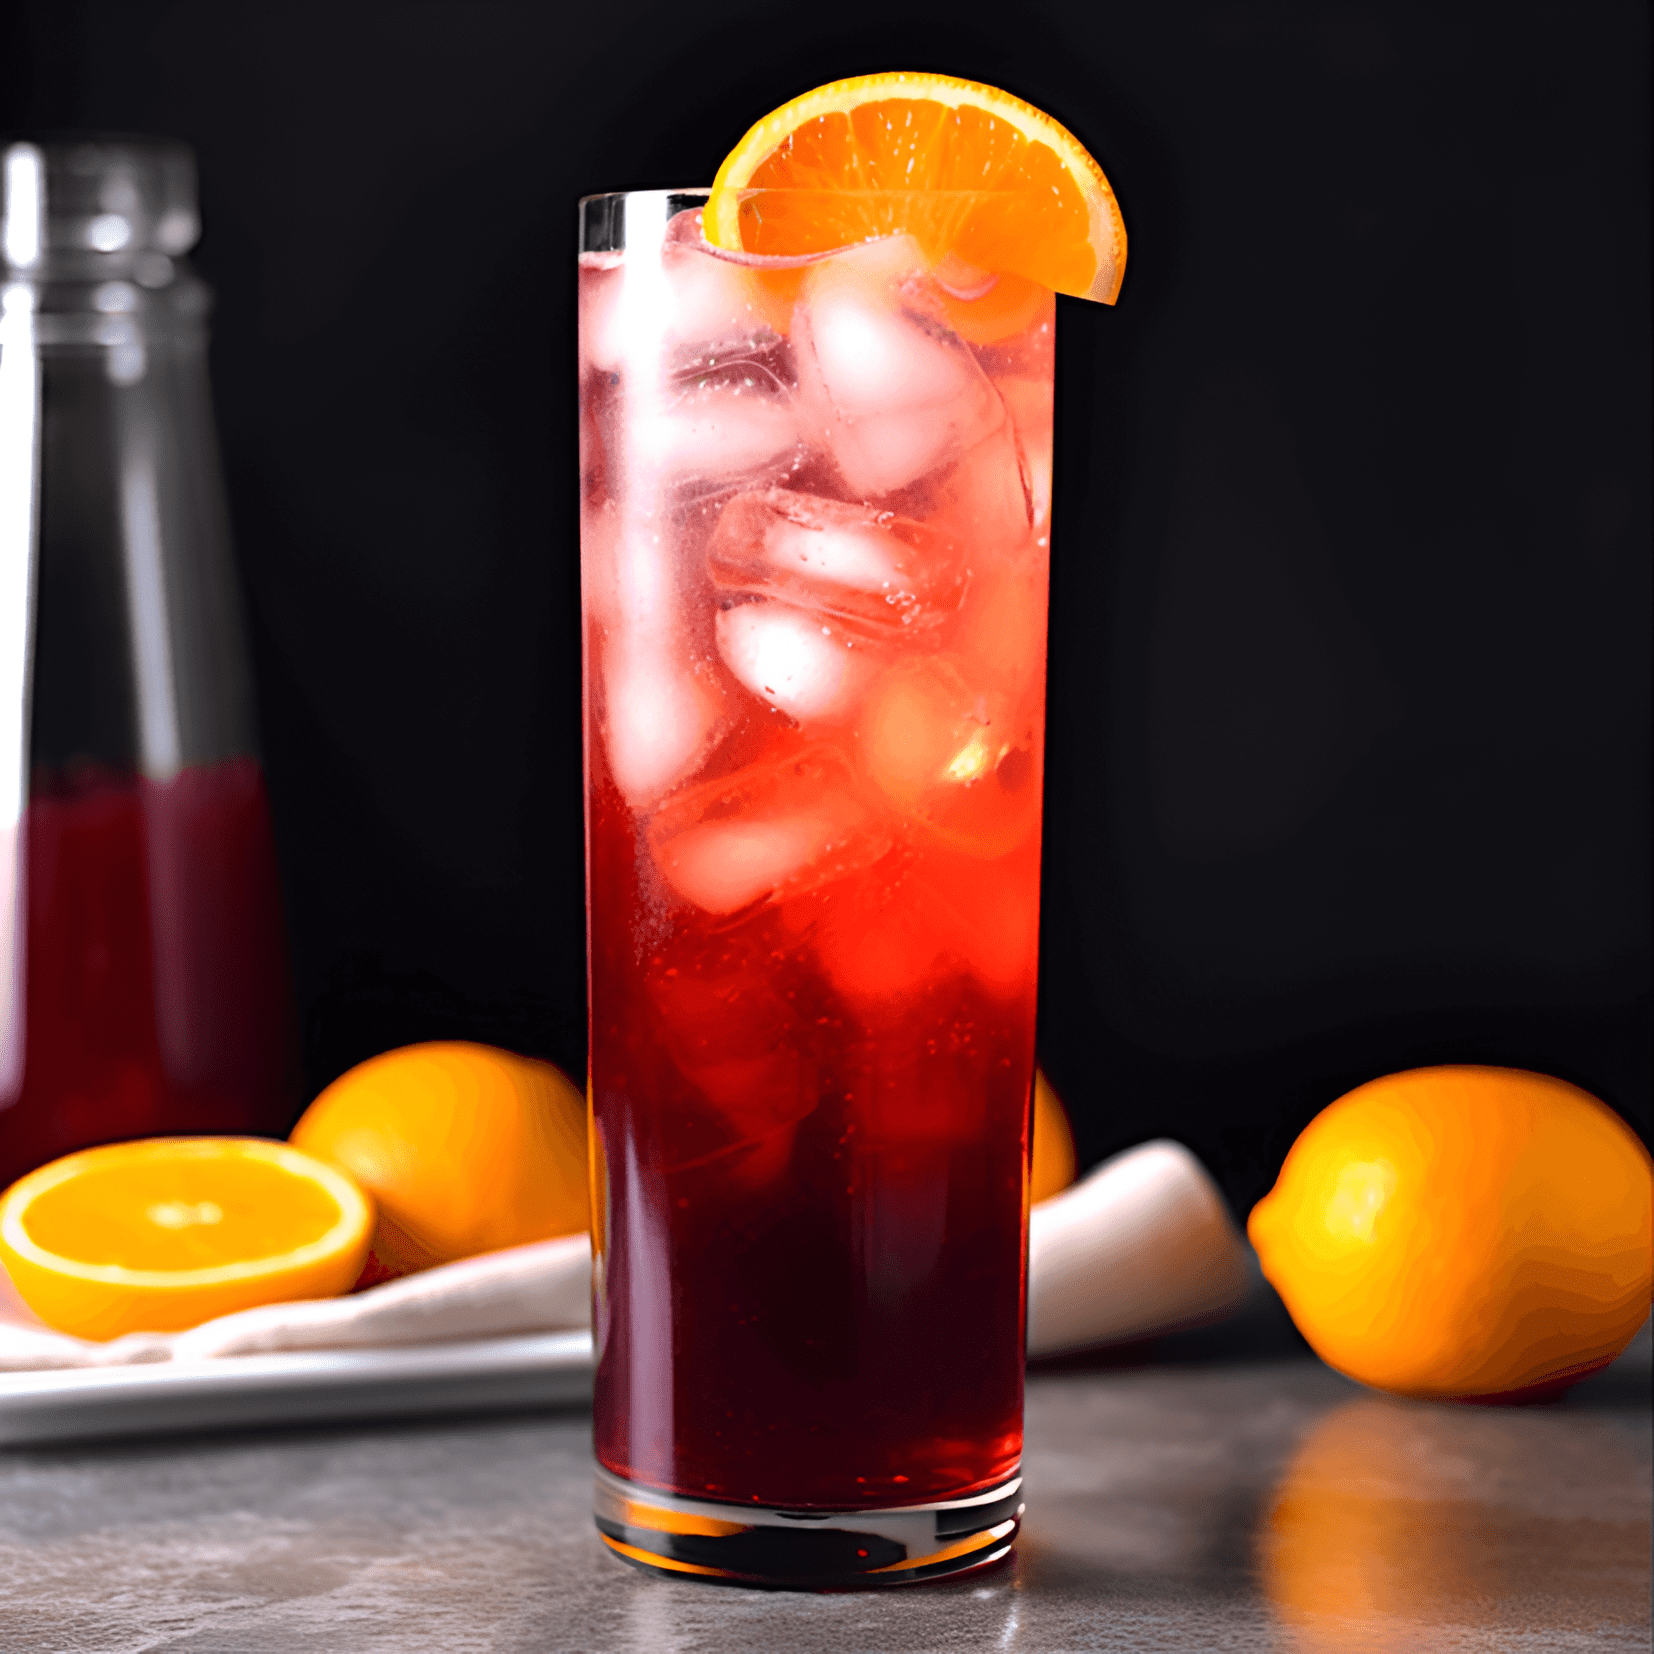 Bulldog Cocktail Recipe - The Bulldog cocktail is a delightful mix of sweet, sour, and fruity flavors. The combination of orange juice, lime juice, and grenadine gives it a tangy and refreshing taste, while the vodka and triple sec add a subtle sweetness and a hint of warmth.